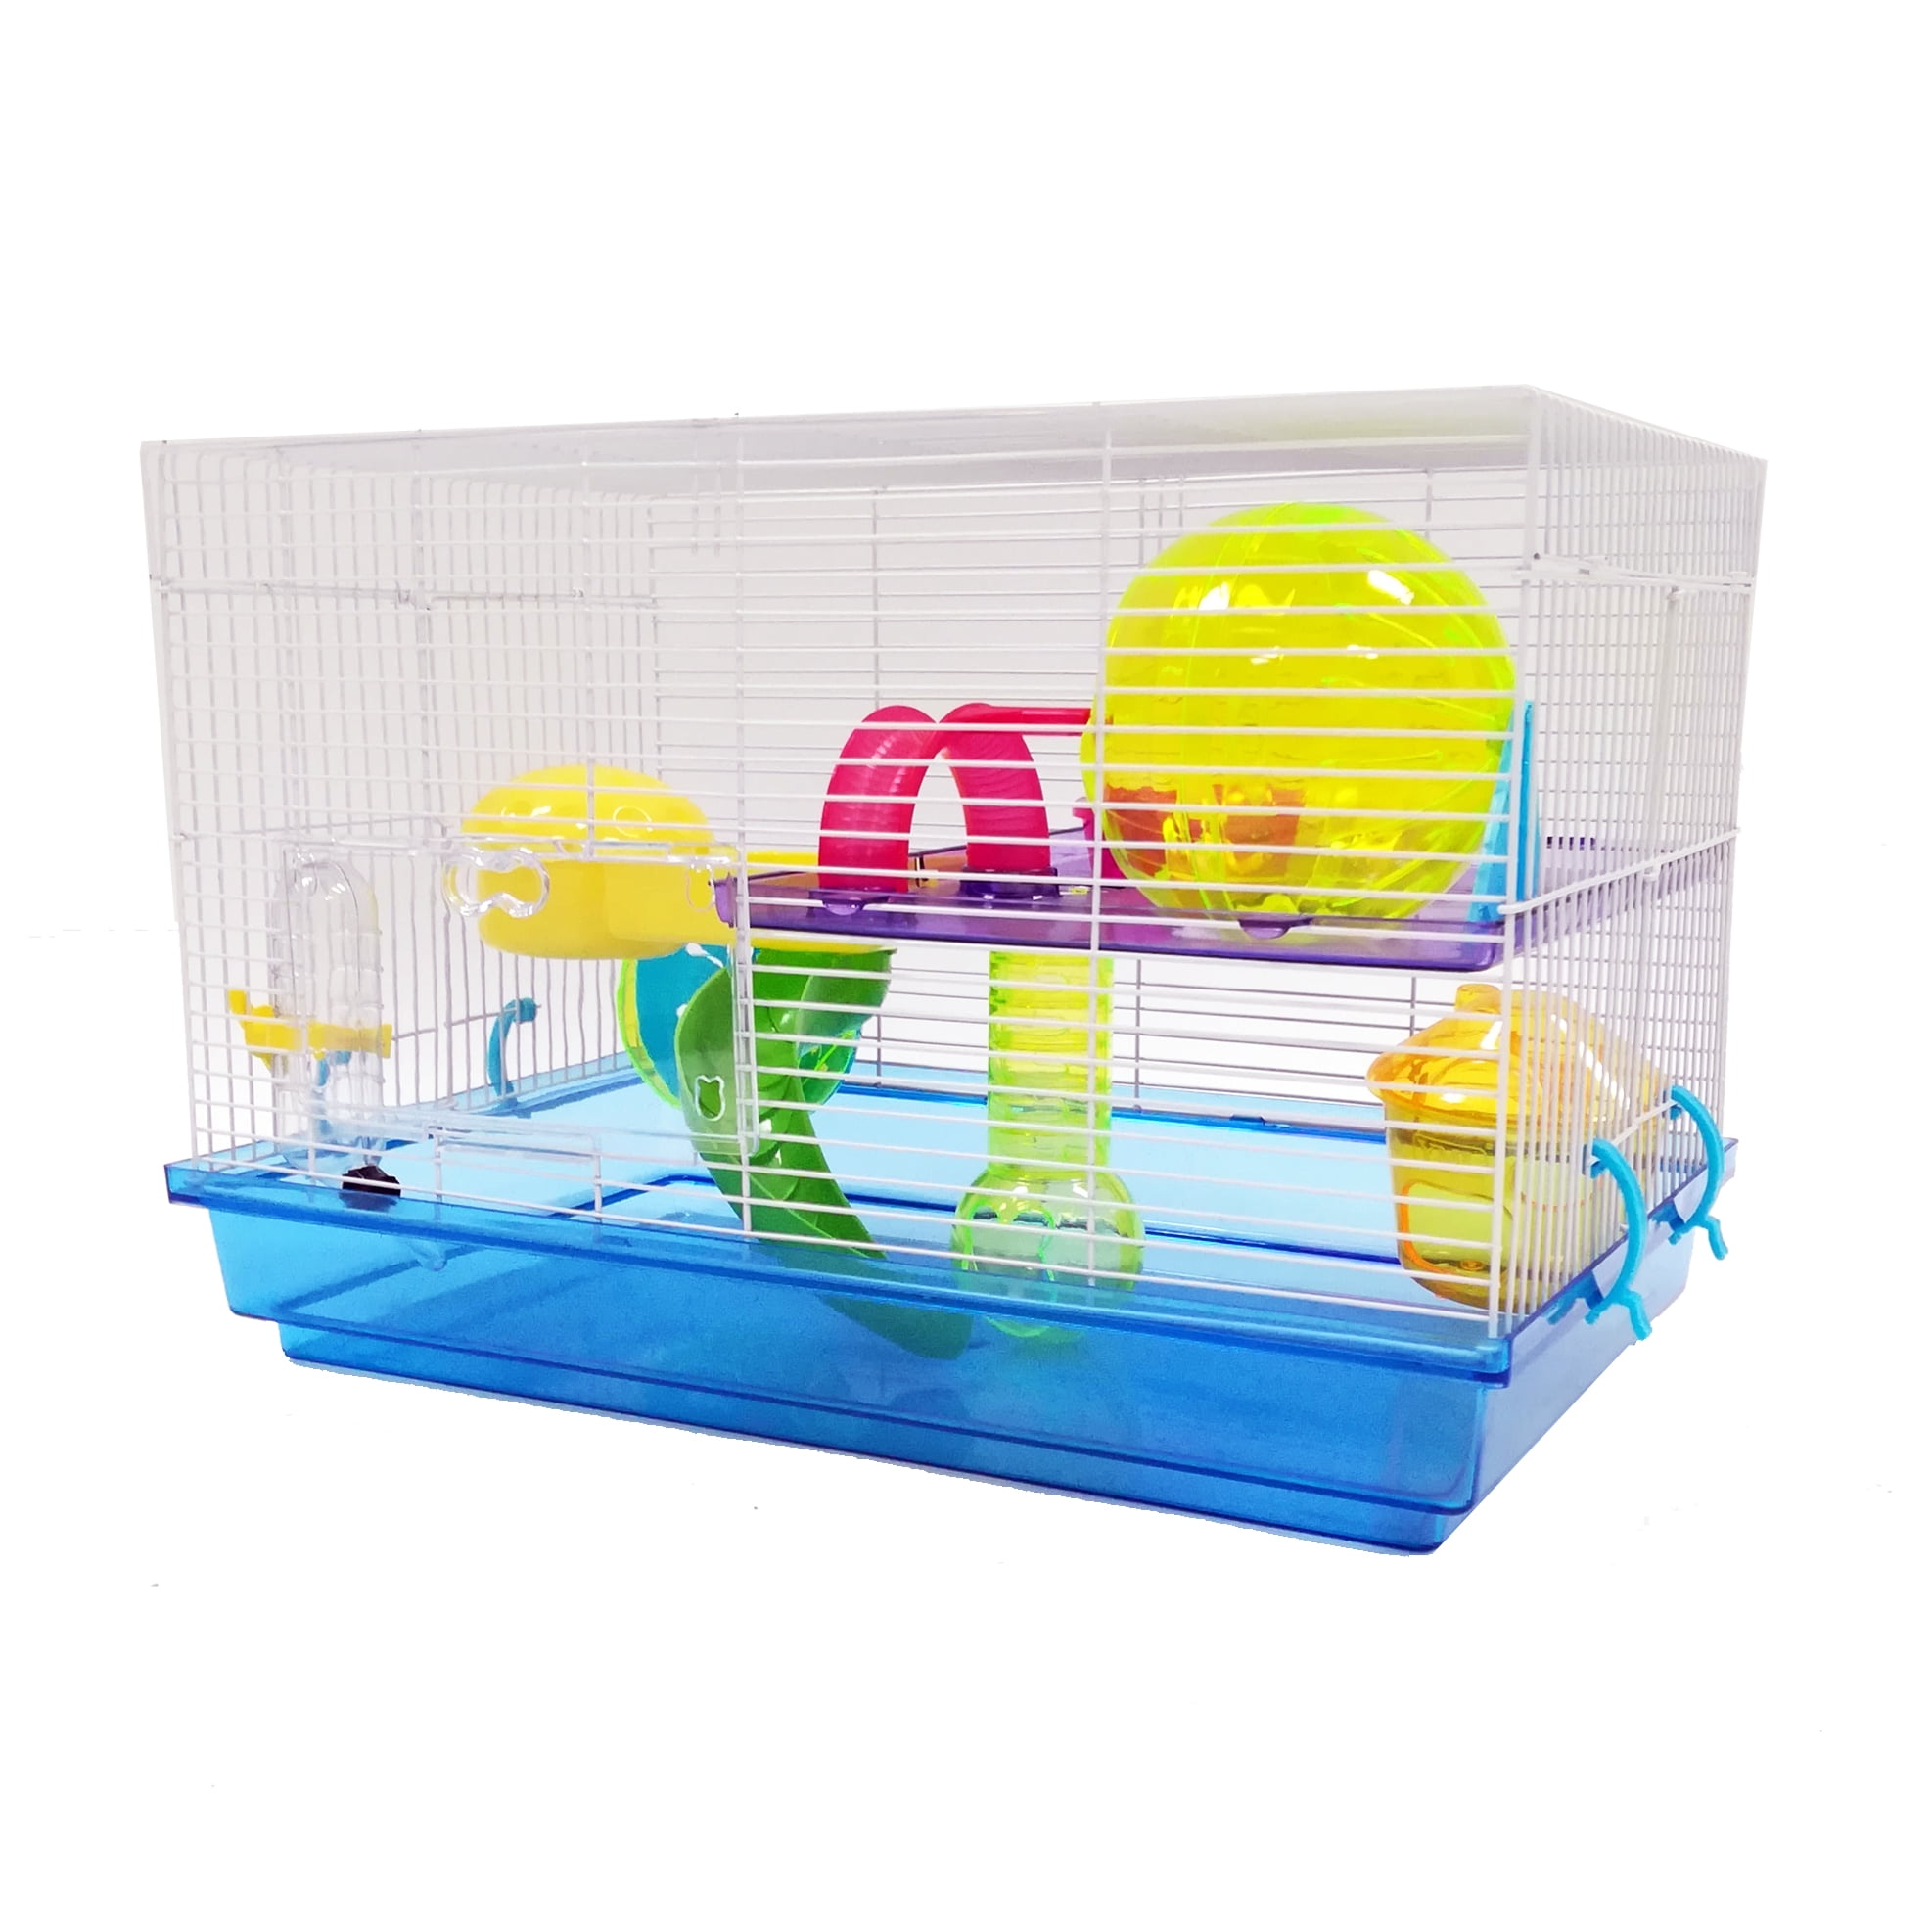 YML Travel Mice, Dwarf hamster Pink Cage, Small